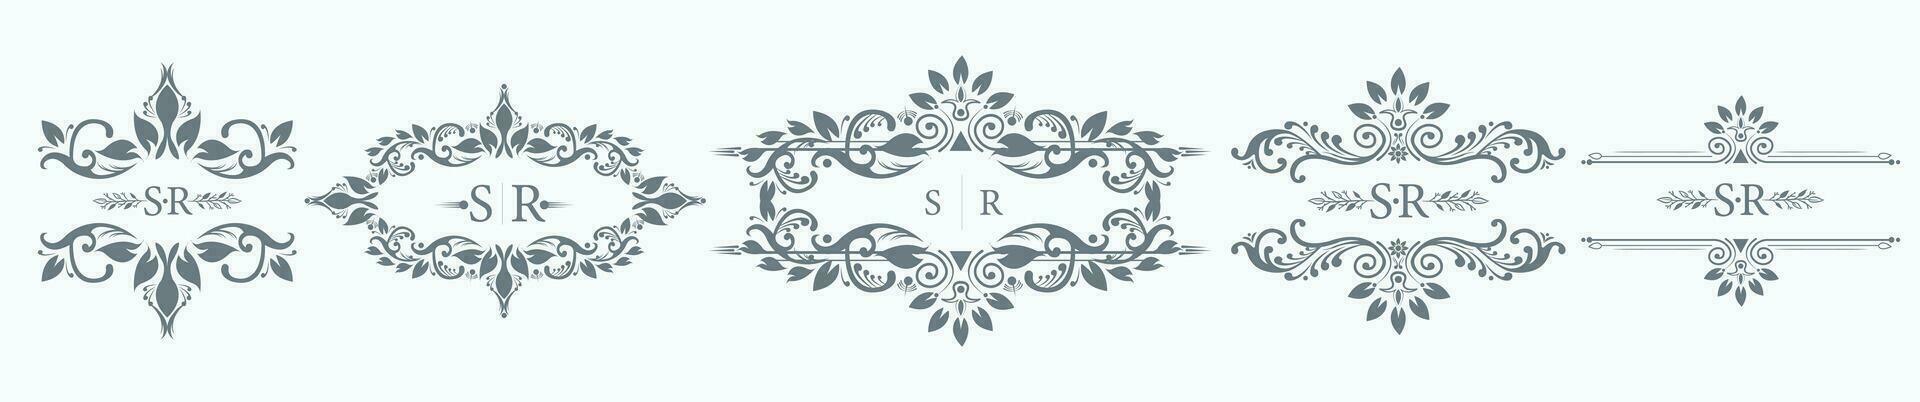 SR initial with intricate border designs for wedding monogram. Set of five wedding crests with SR logo vector